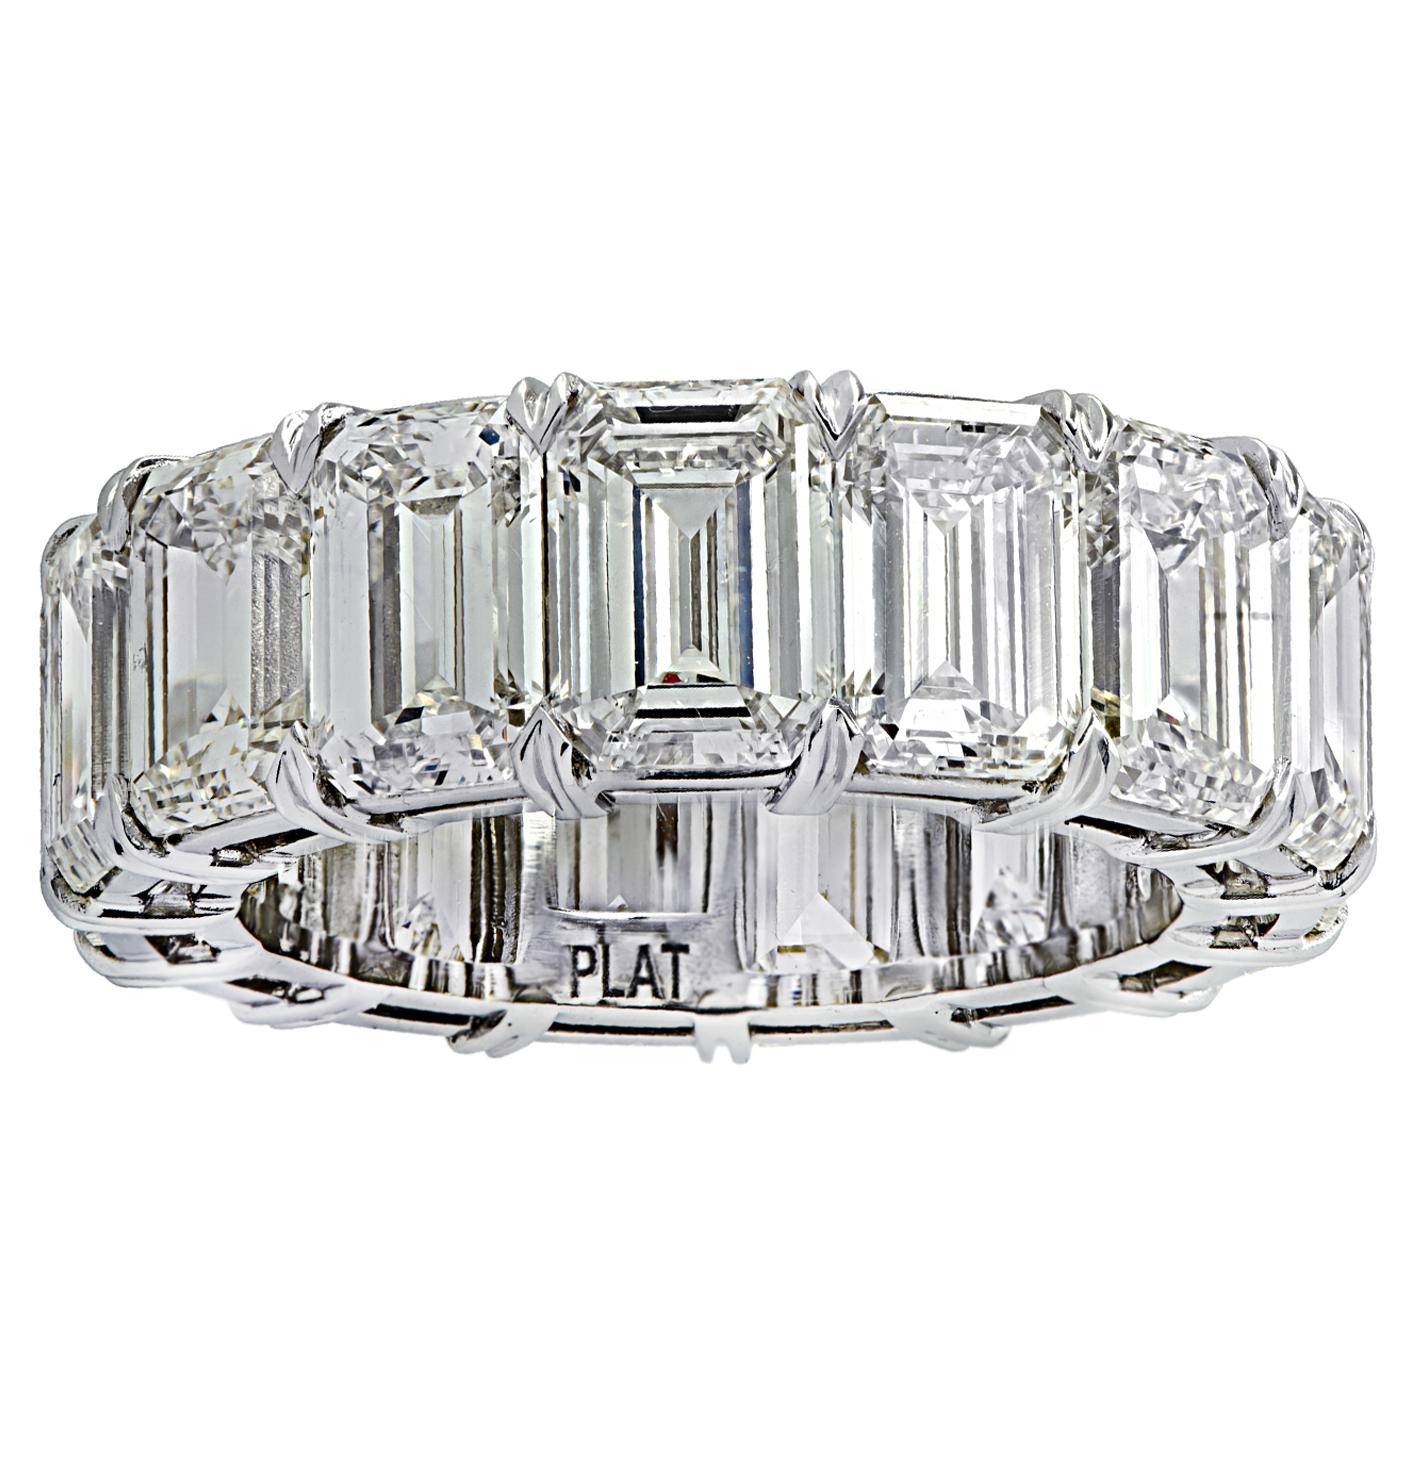 Exquisite Vivid Diamonds eternity band crafted by hand in Platinum, showcasing 15 stunning emerald cut diamonds weighing 15.58 carats total, J color, VVS-  VS clarity. Each diamond is carefully selected, perfectly matched and set in a seamless sea